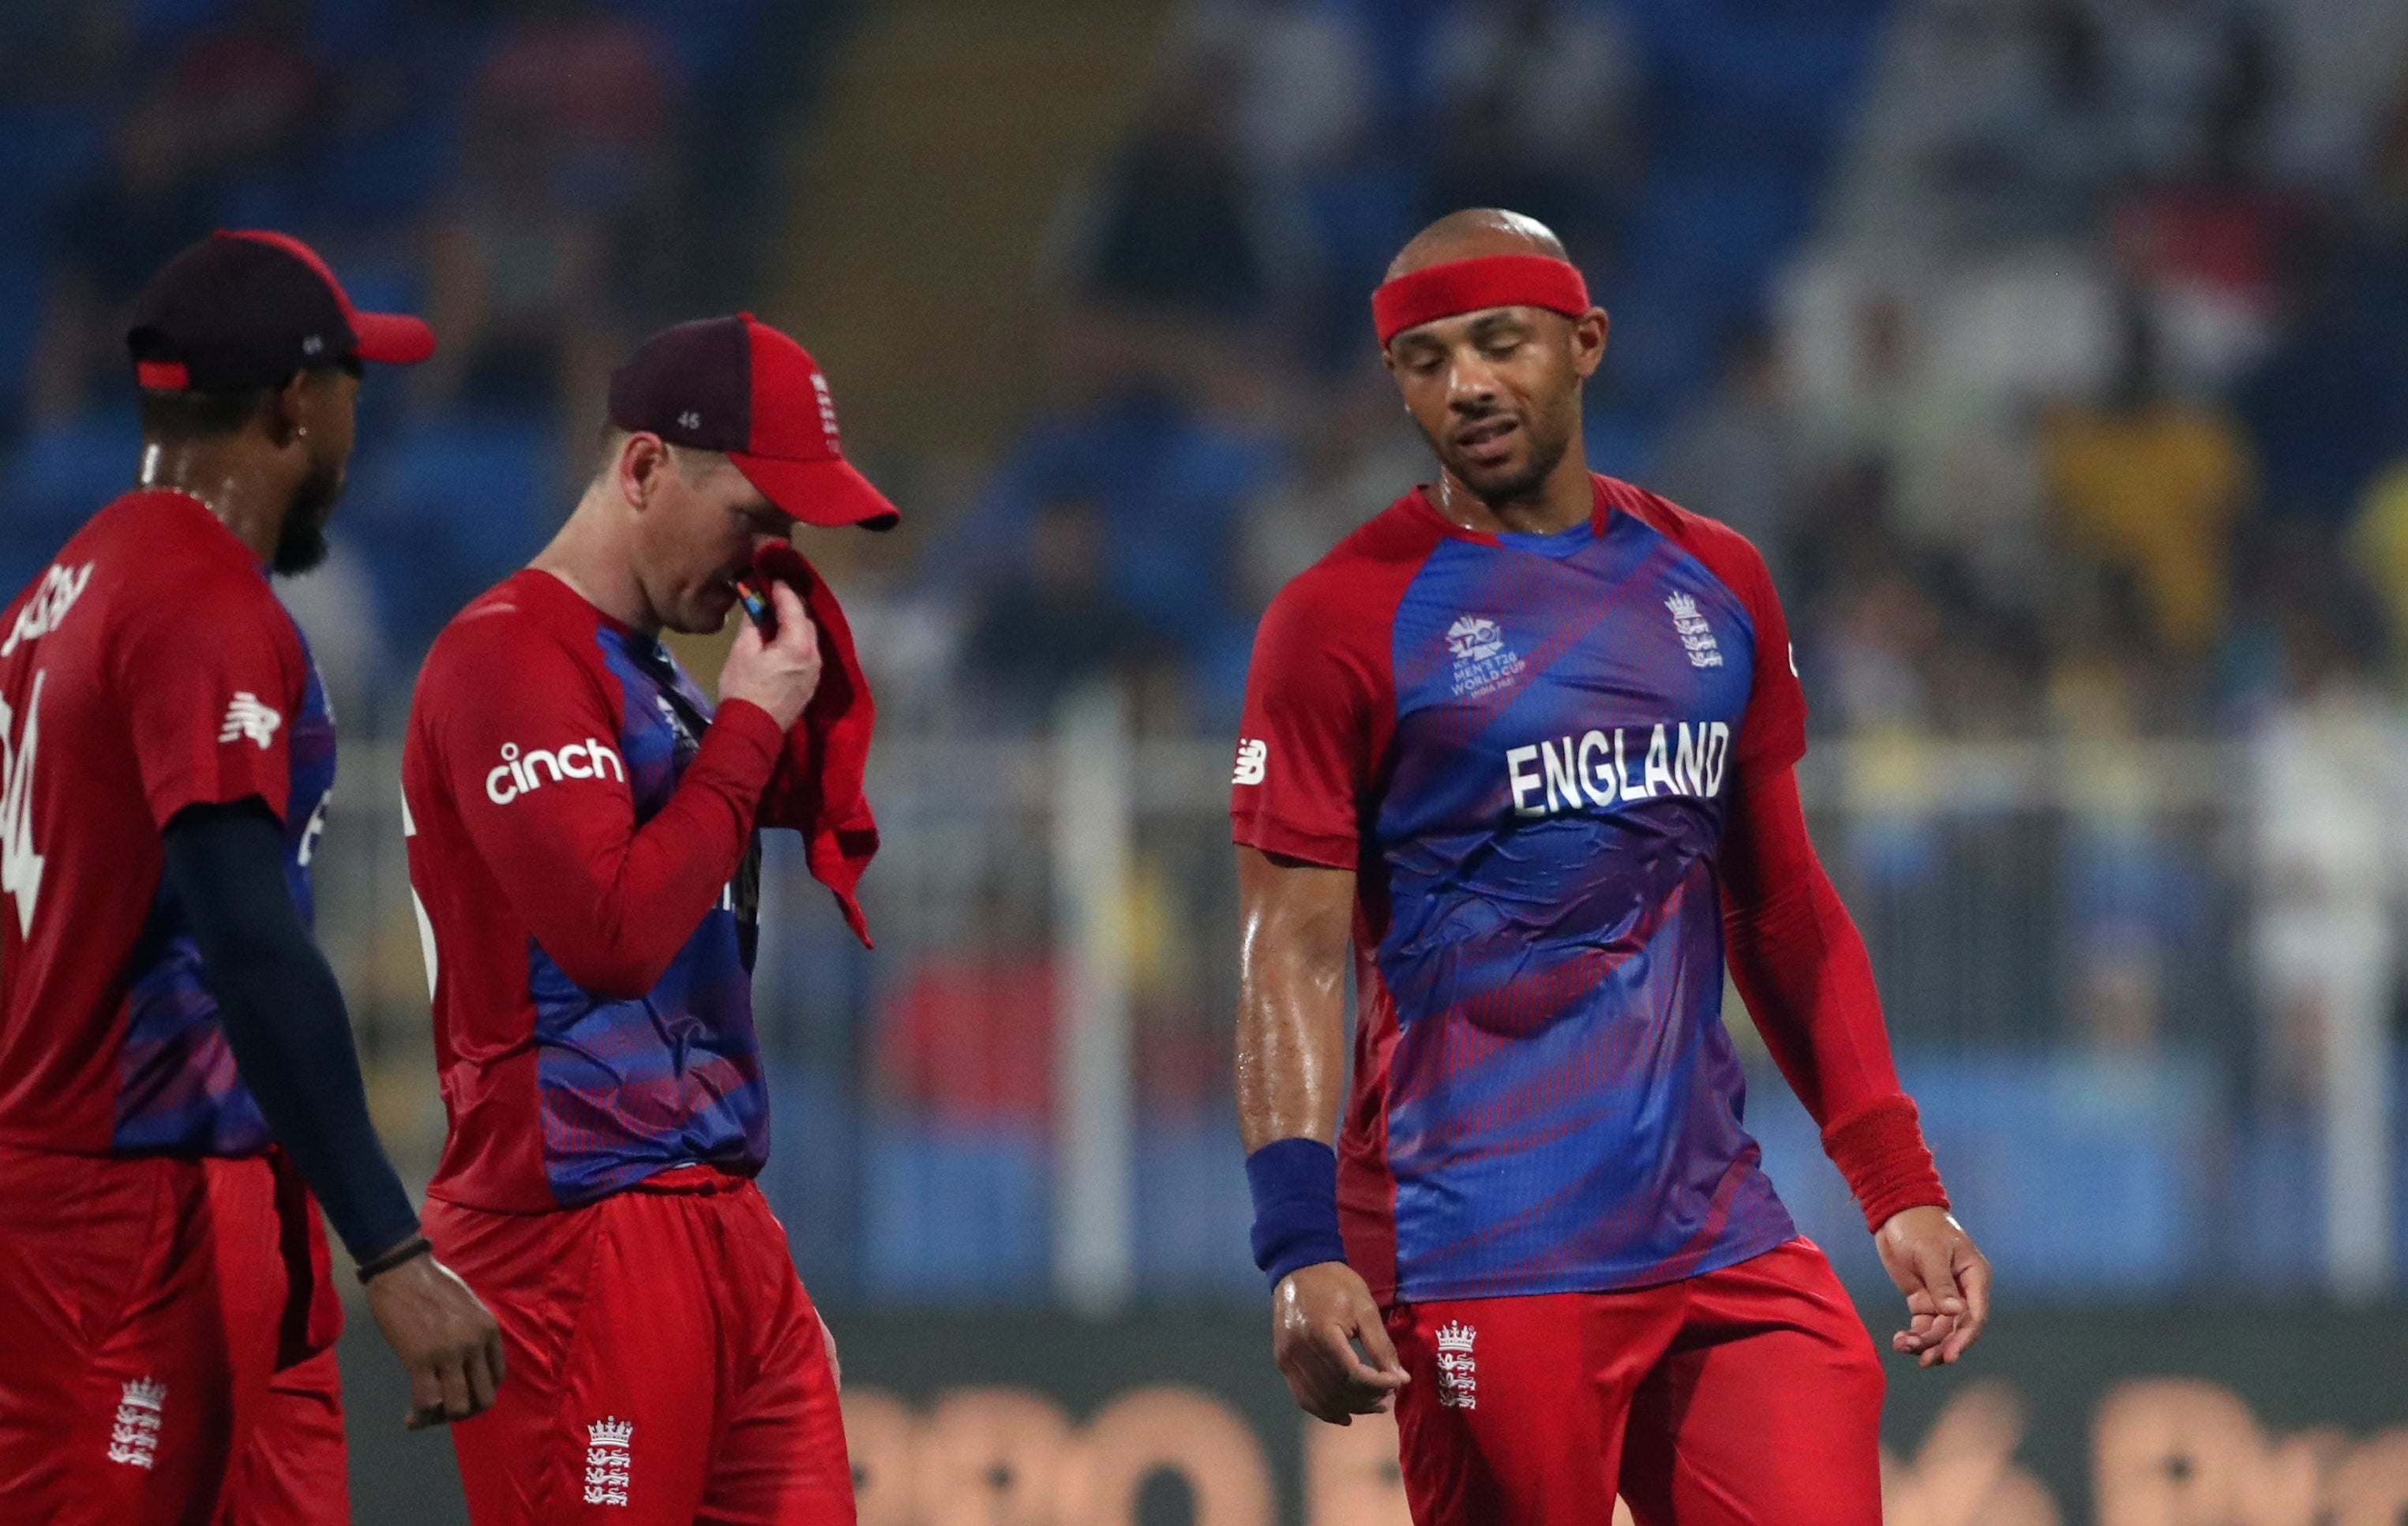 Tymal Mills limped out of the match with Sri Lanka